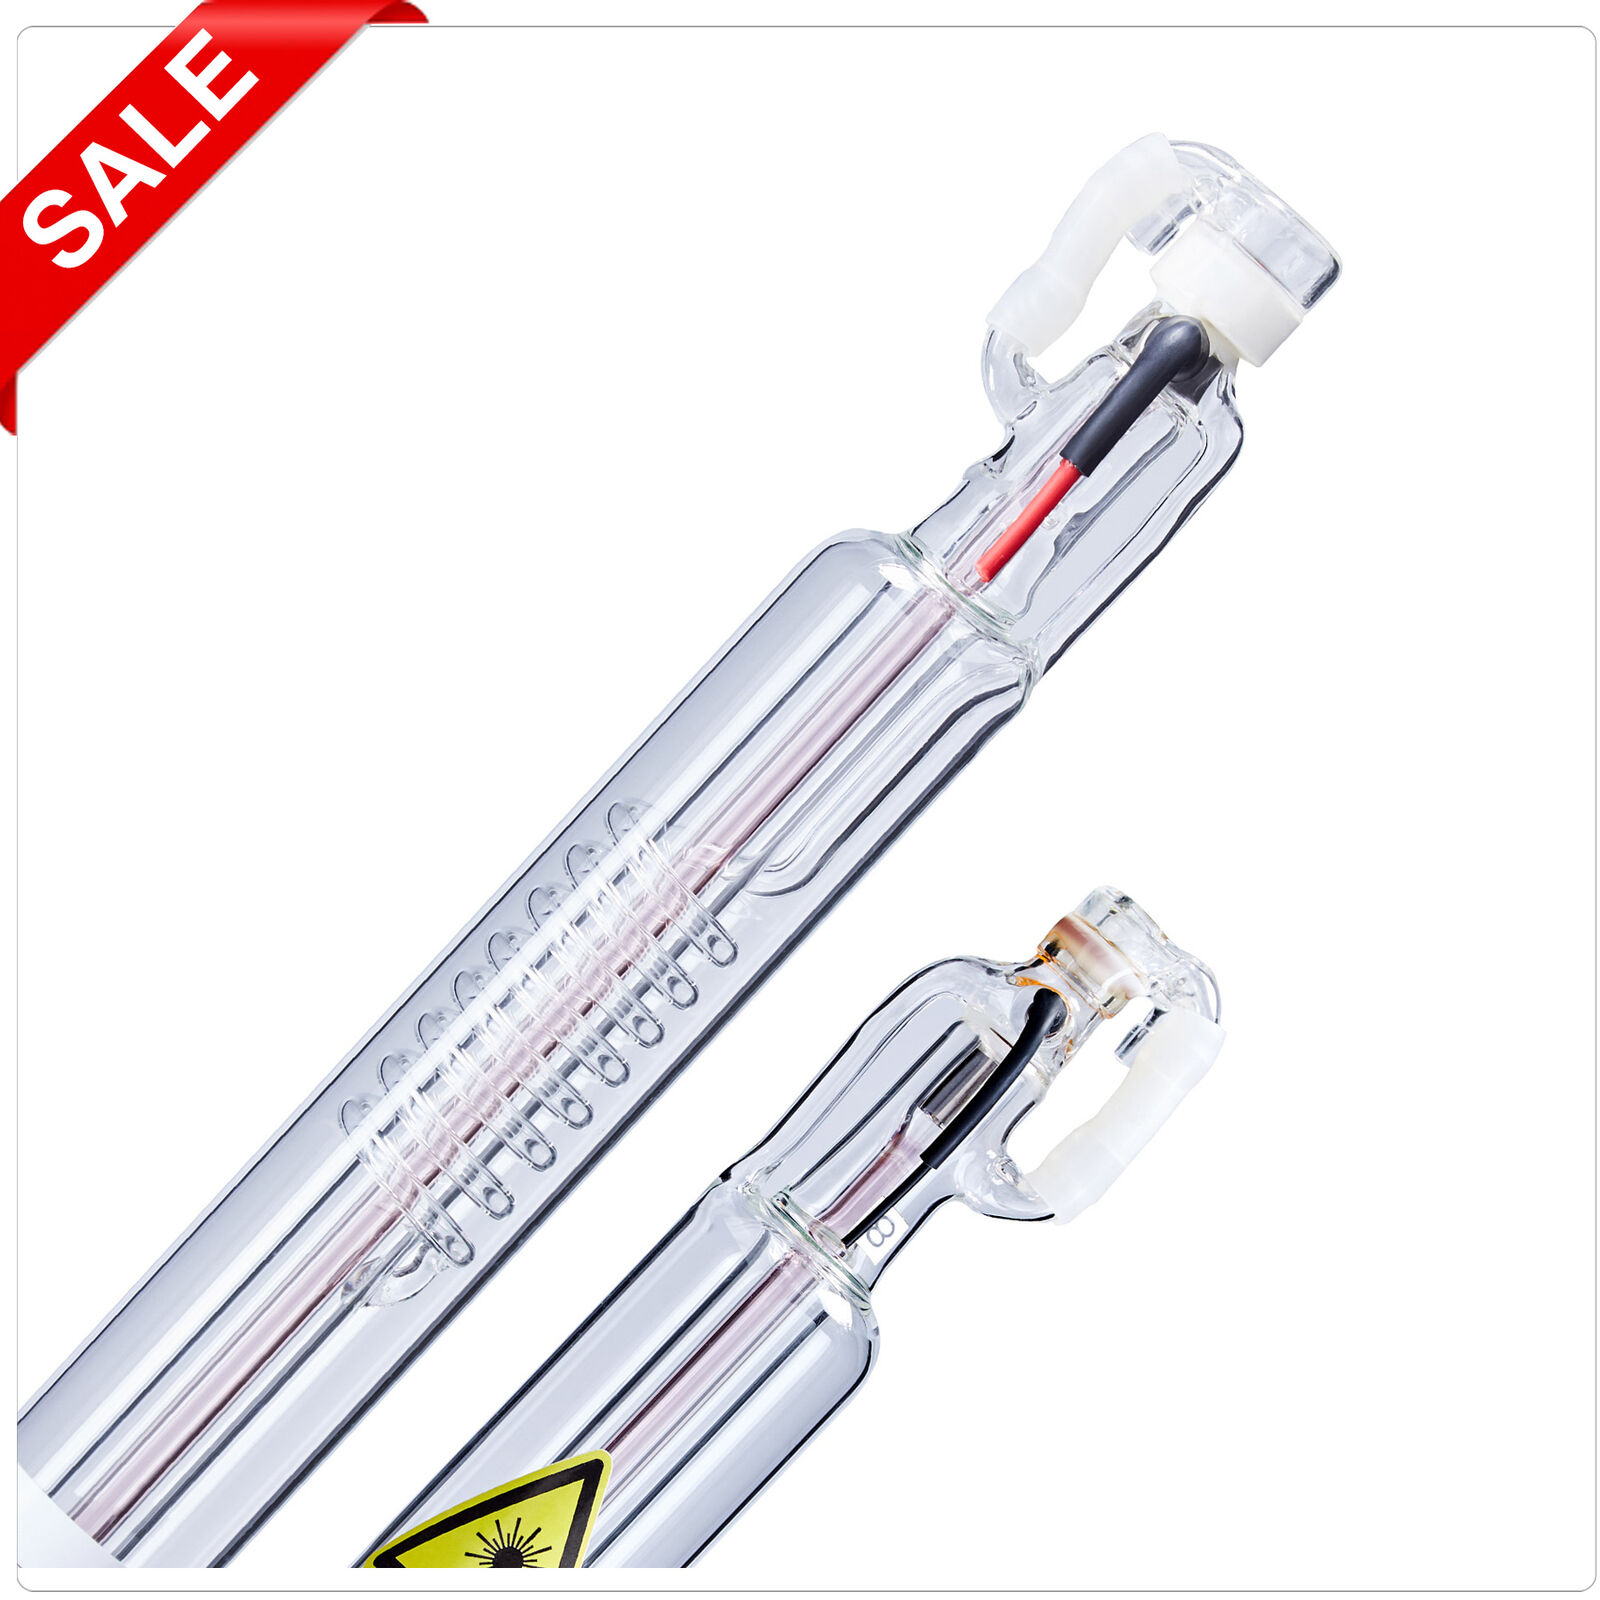 OMTech Water Cooling 88cm 50W CO2 Laser Tube for Laser Engraving Cutting Machine